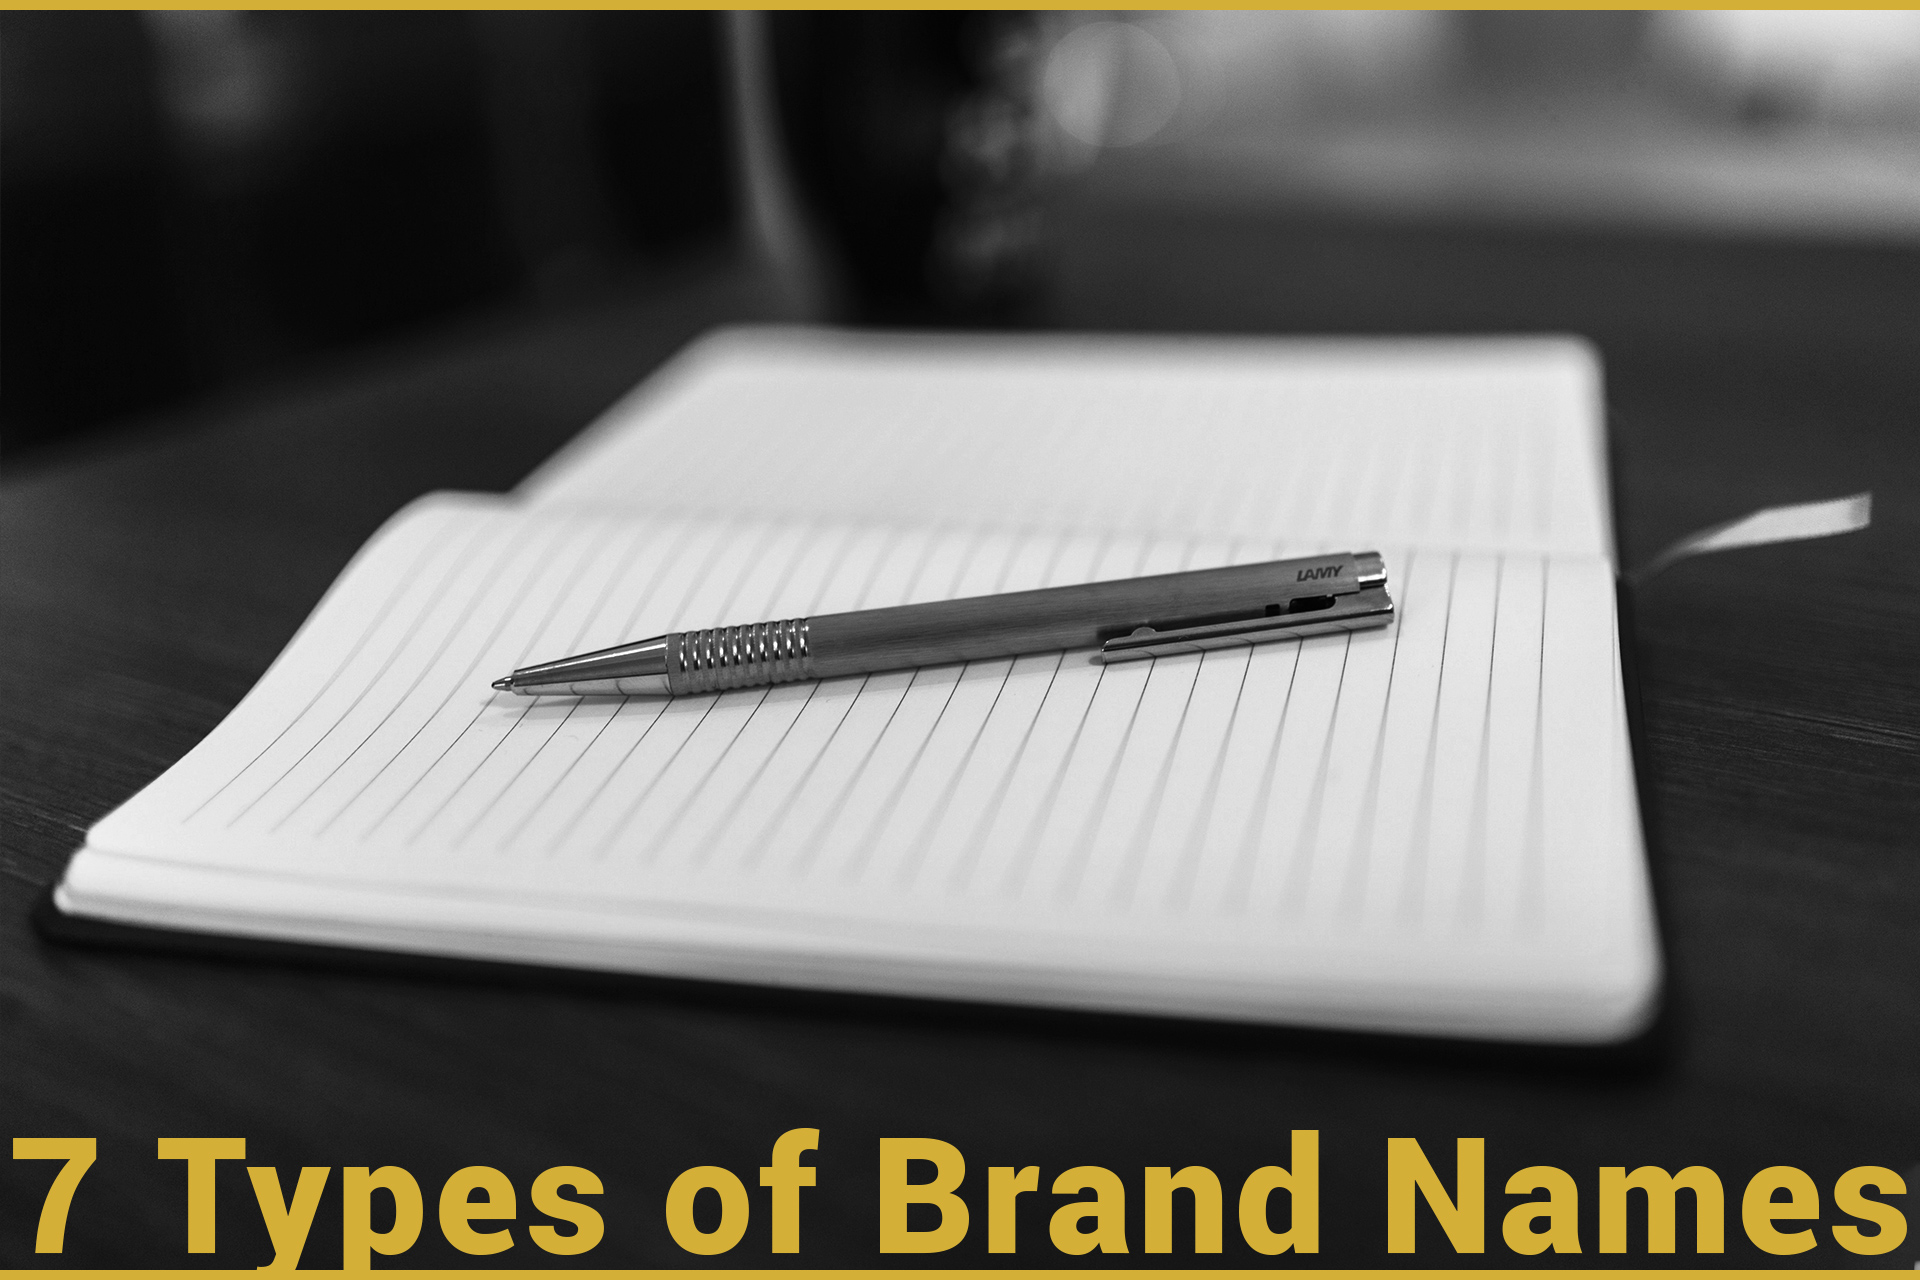 7 types of brand names. A black and white photo of a pen on a notebook in a coffee shop.